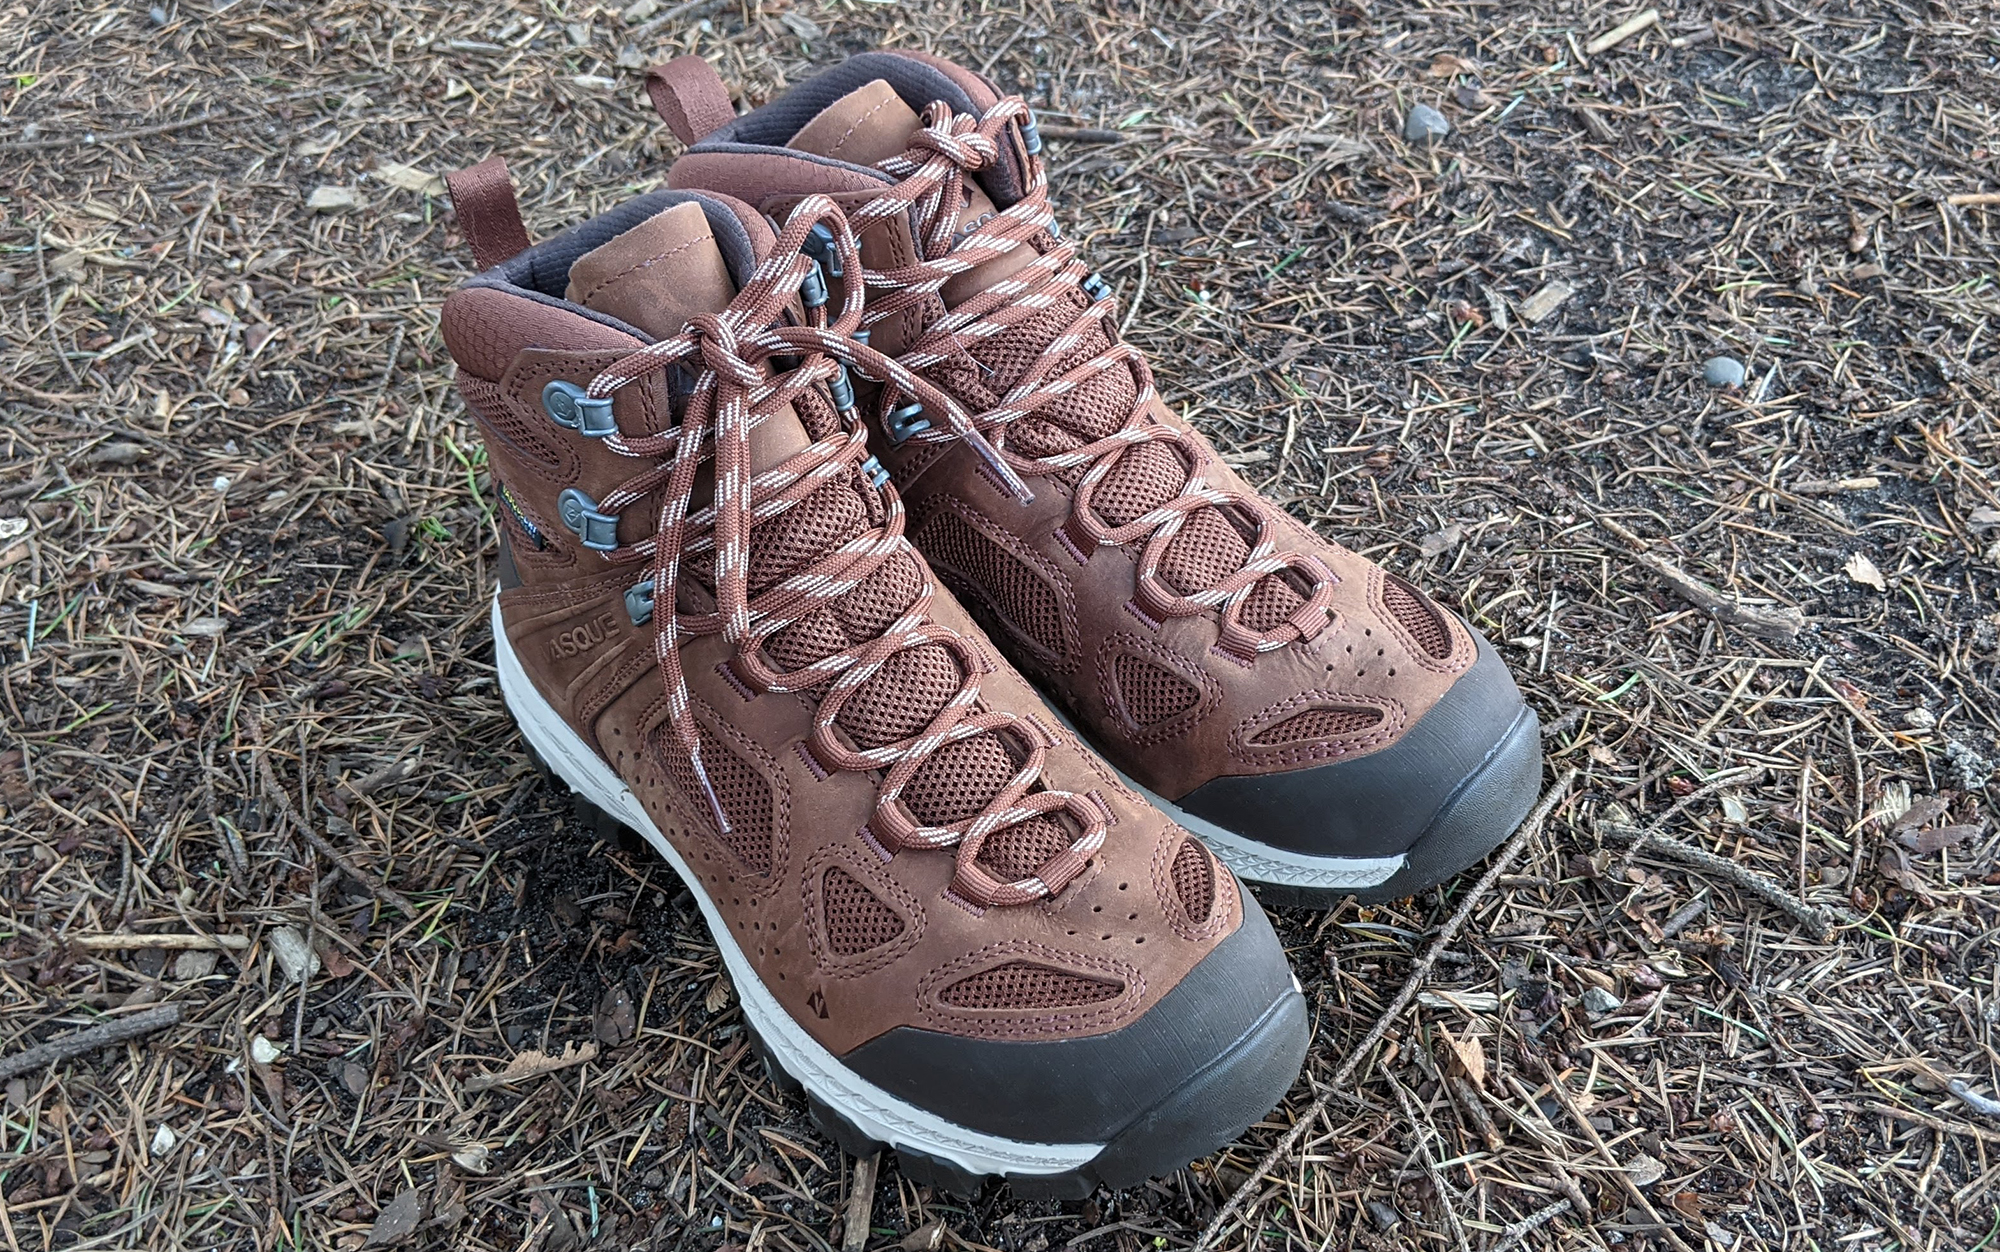 The Vasque Breeze are some of the best waterproof hiking boots.